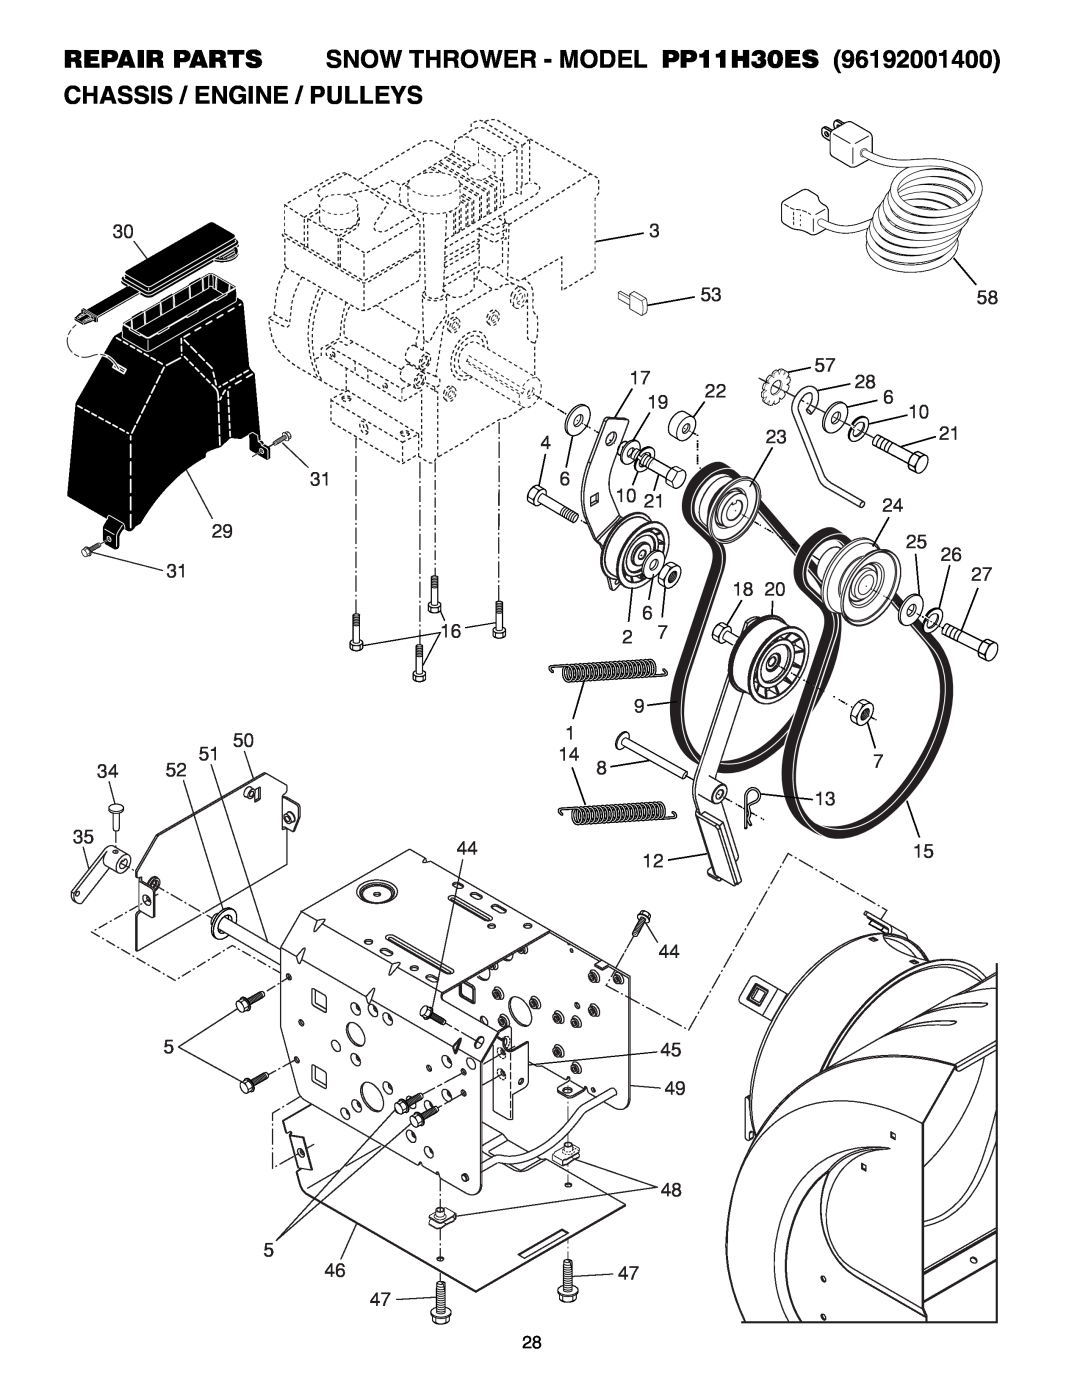 Poulan 96192001400, 406281 owner manual Chassis / Engine / Pulleys, REPAIR PARTS SNOW THROWER - MODEL PP11H30ES 